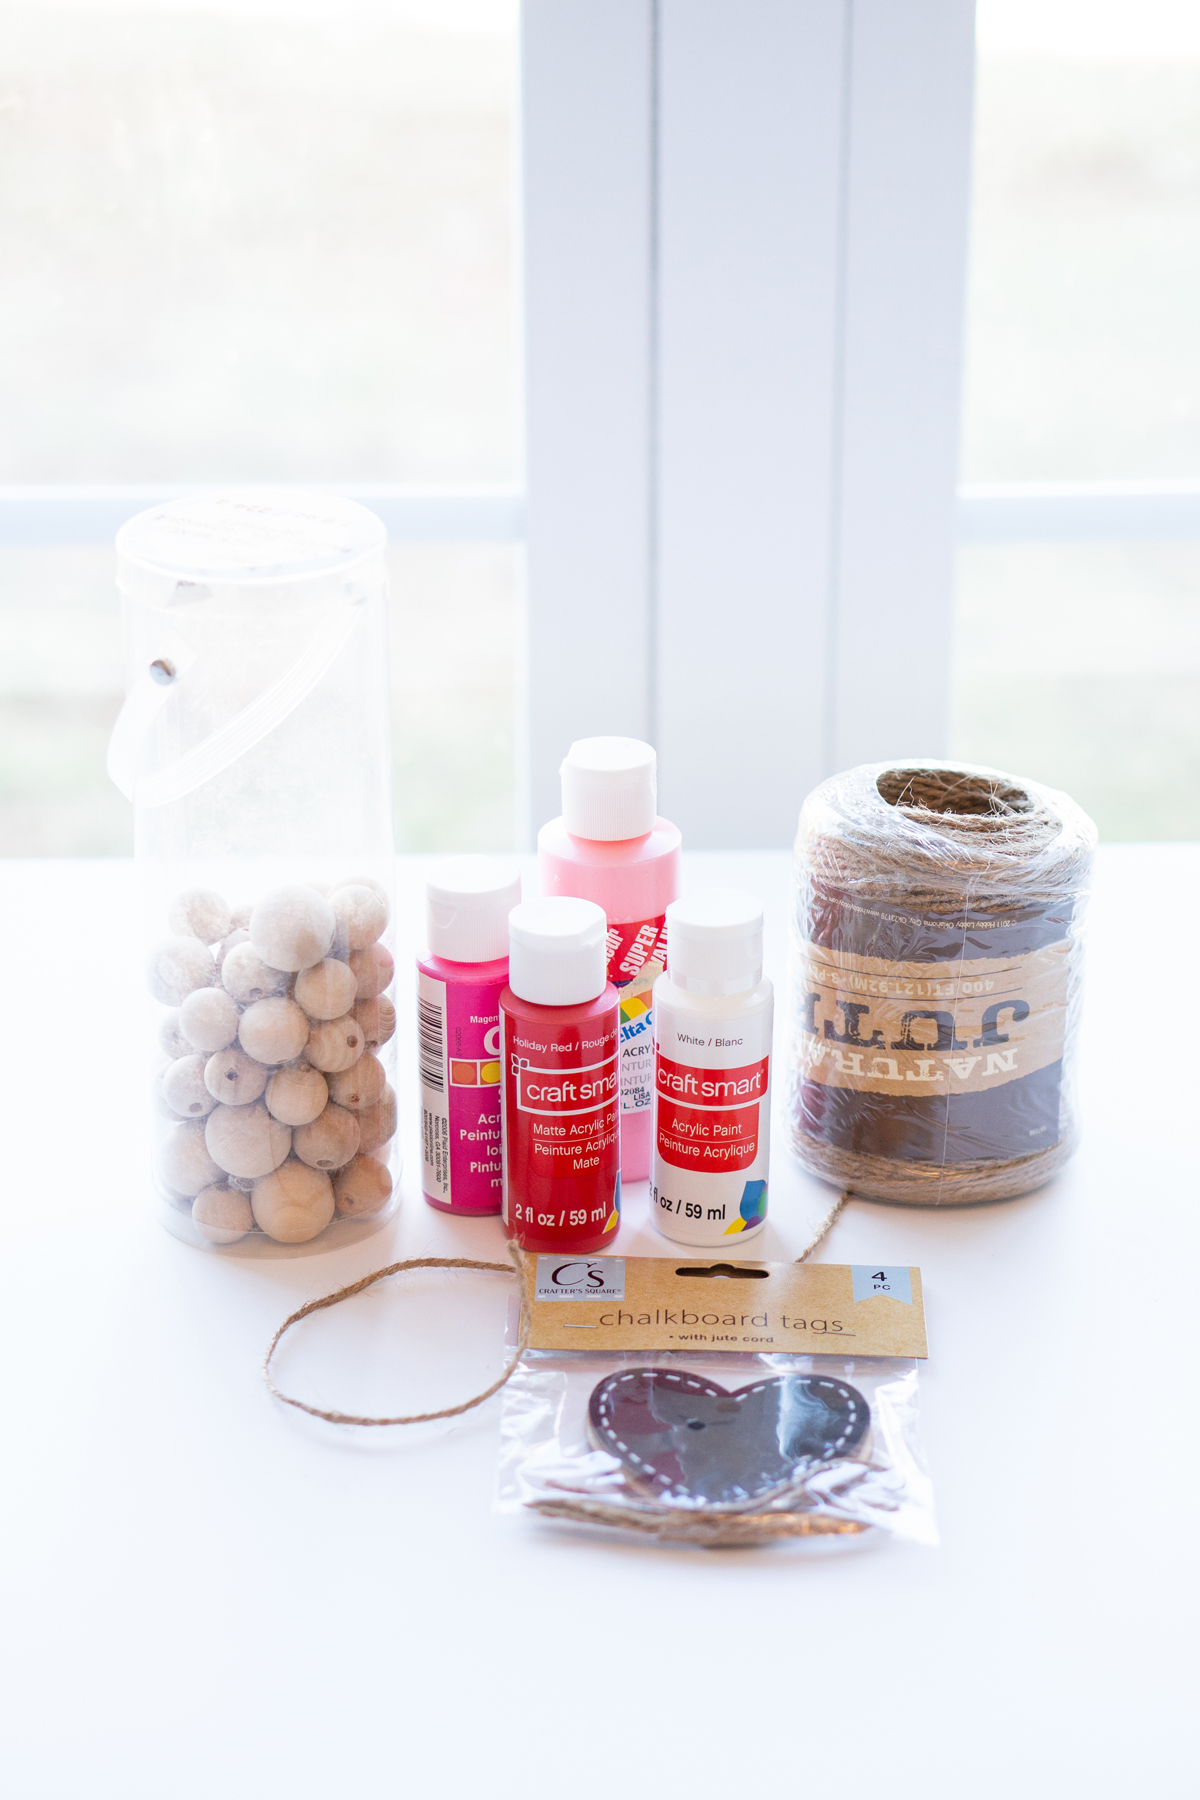 This image shows the materials needed to make DIY Valentine wood beads. It shows wood beads, paint, jute twine, and wood heart cut outs.